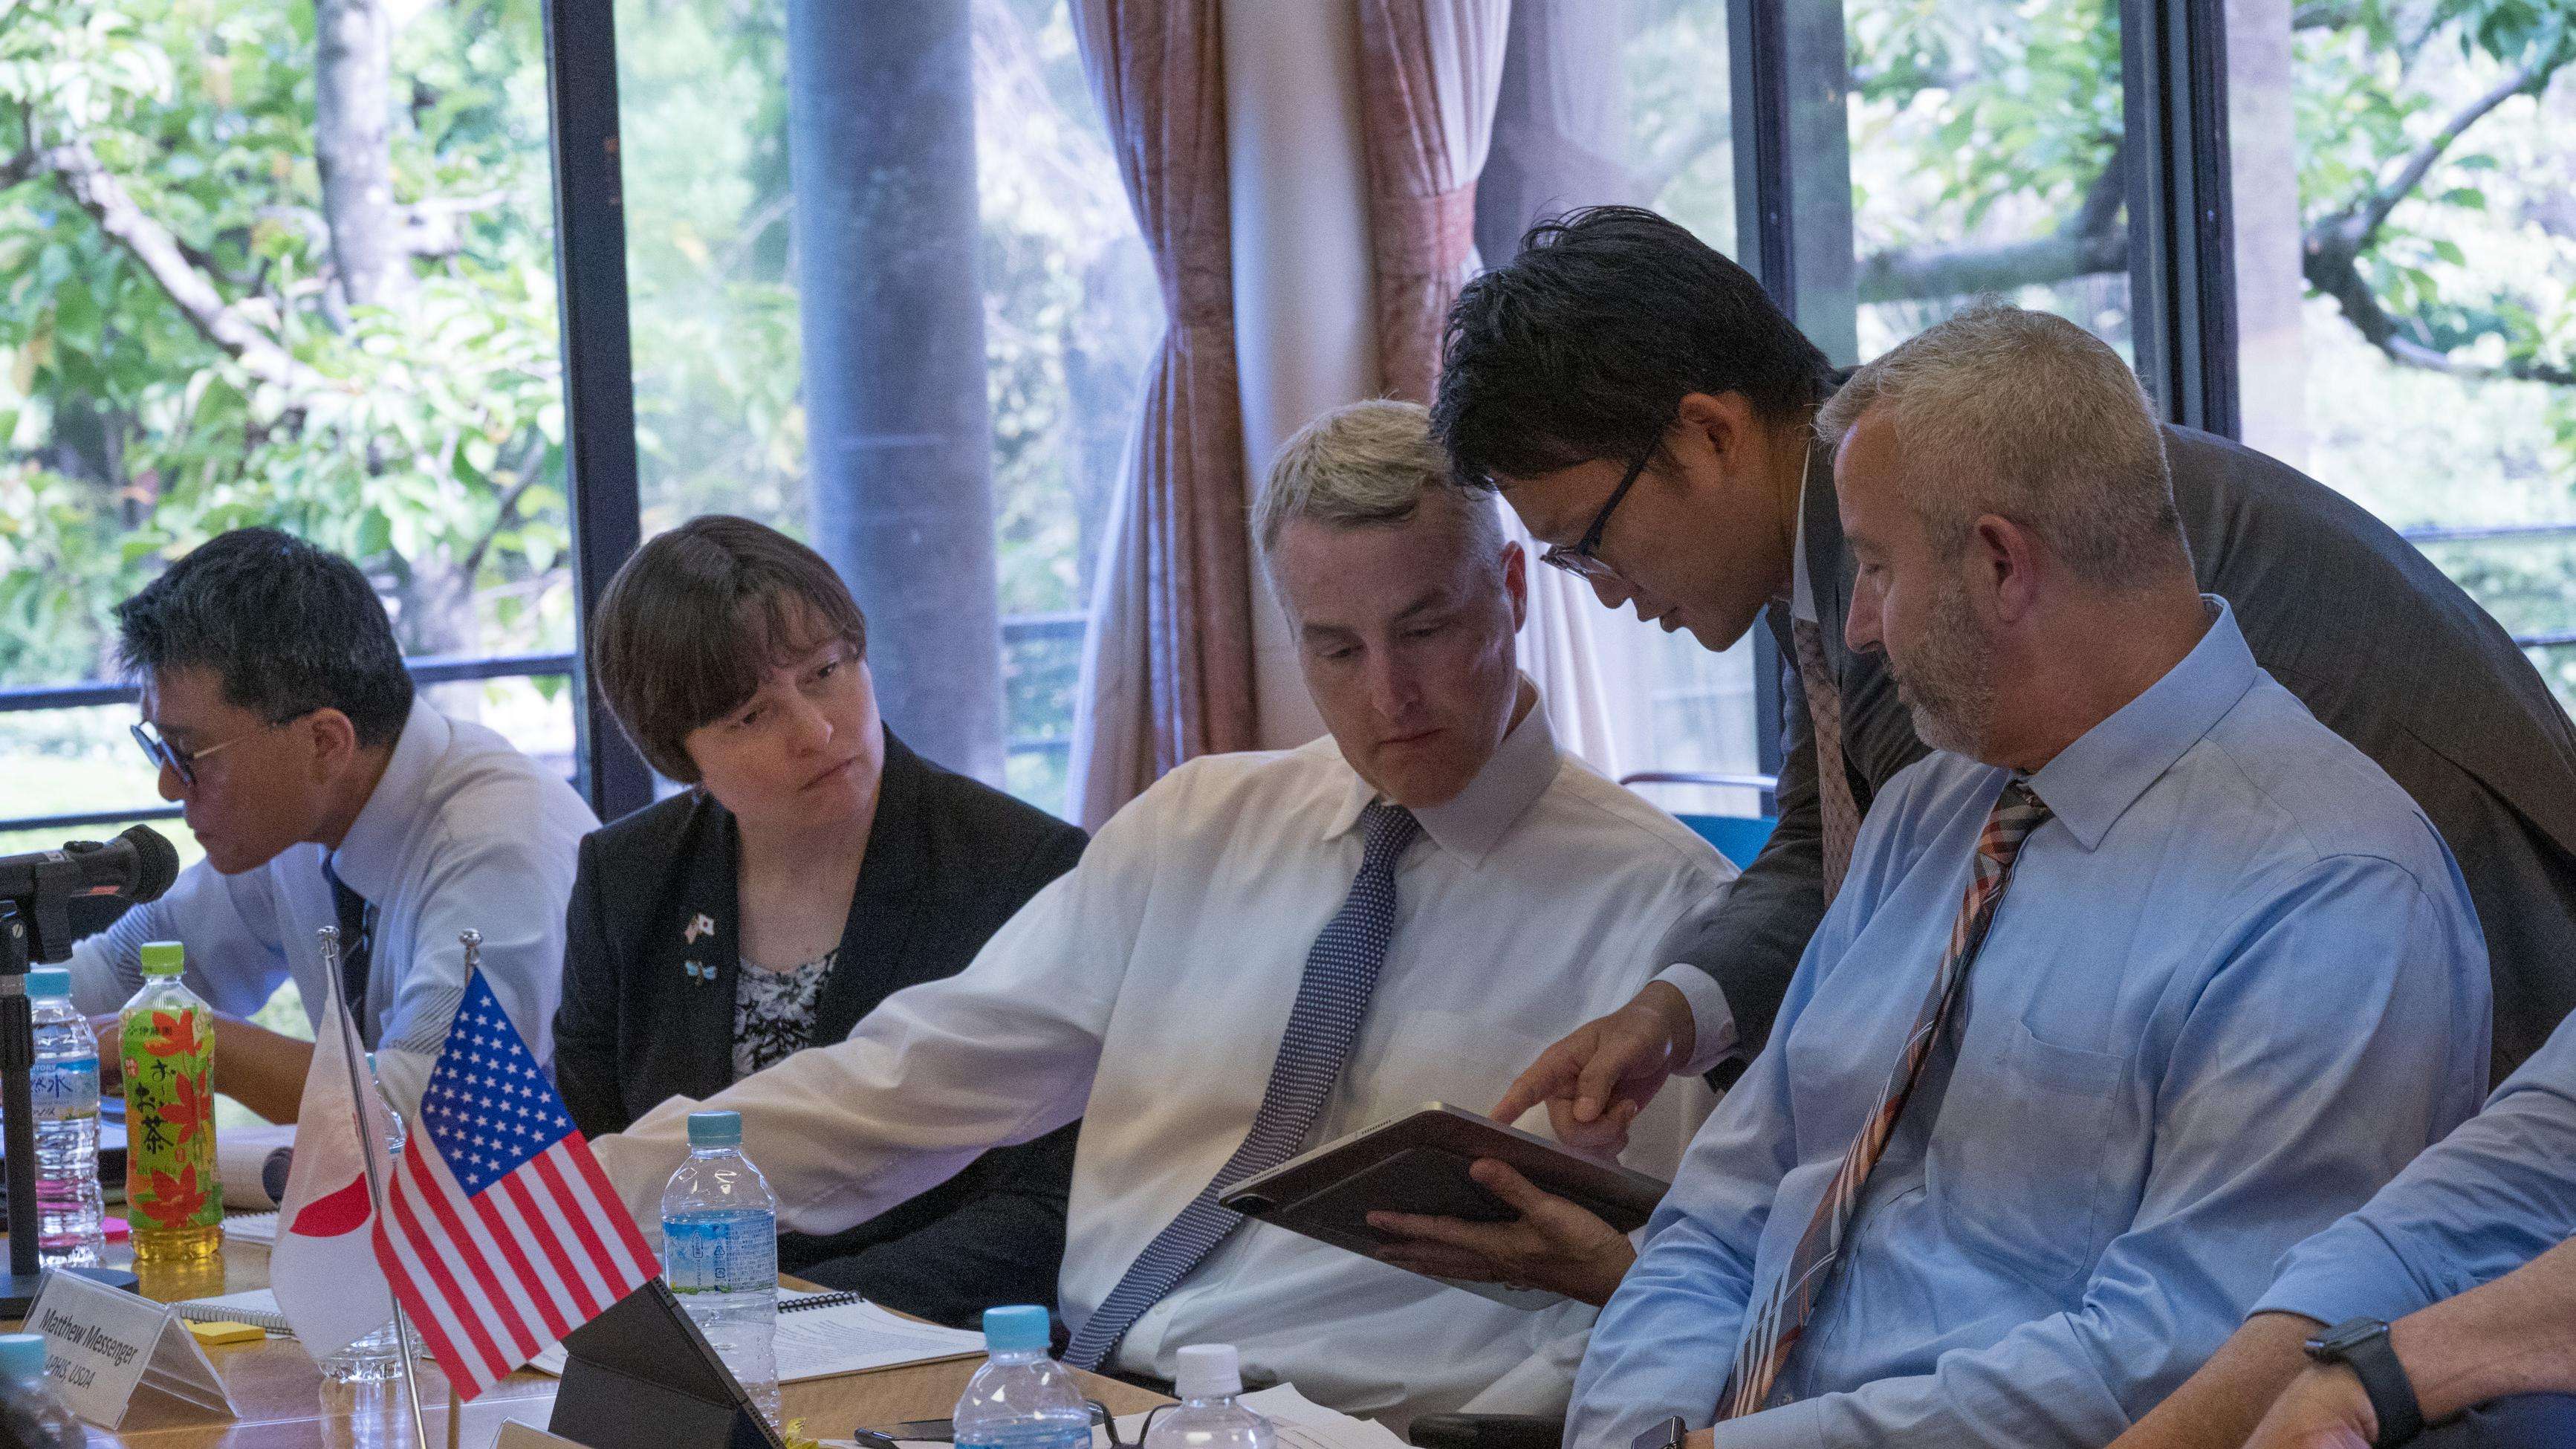 Group of people sitting at a table in conversation with notebooks and a U.S. flag on table.